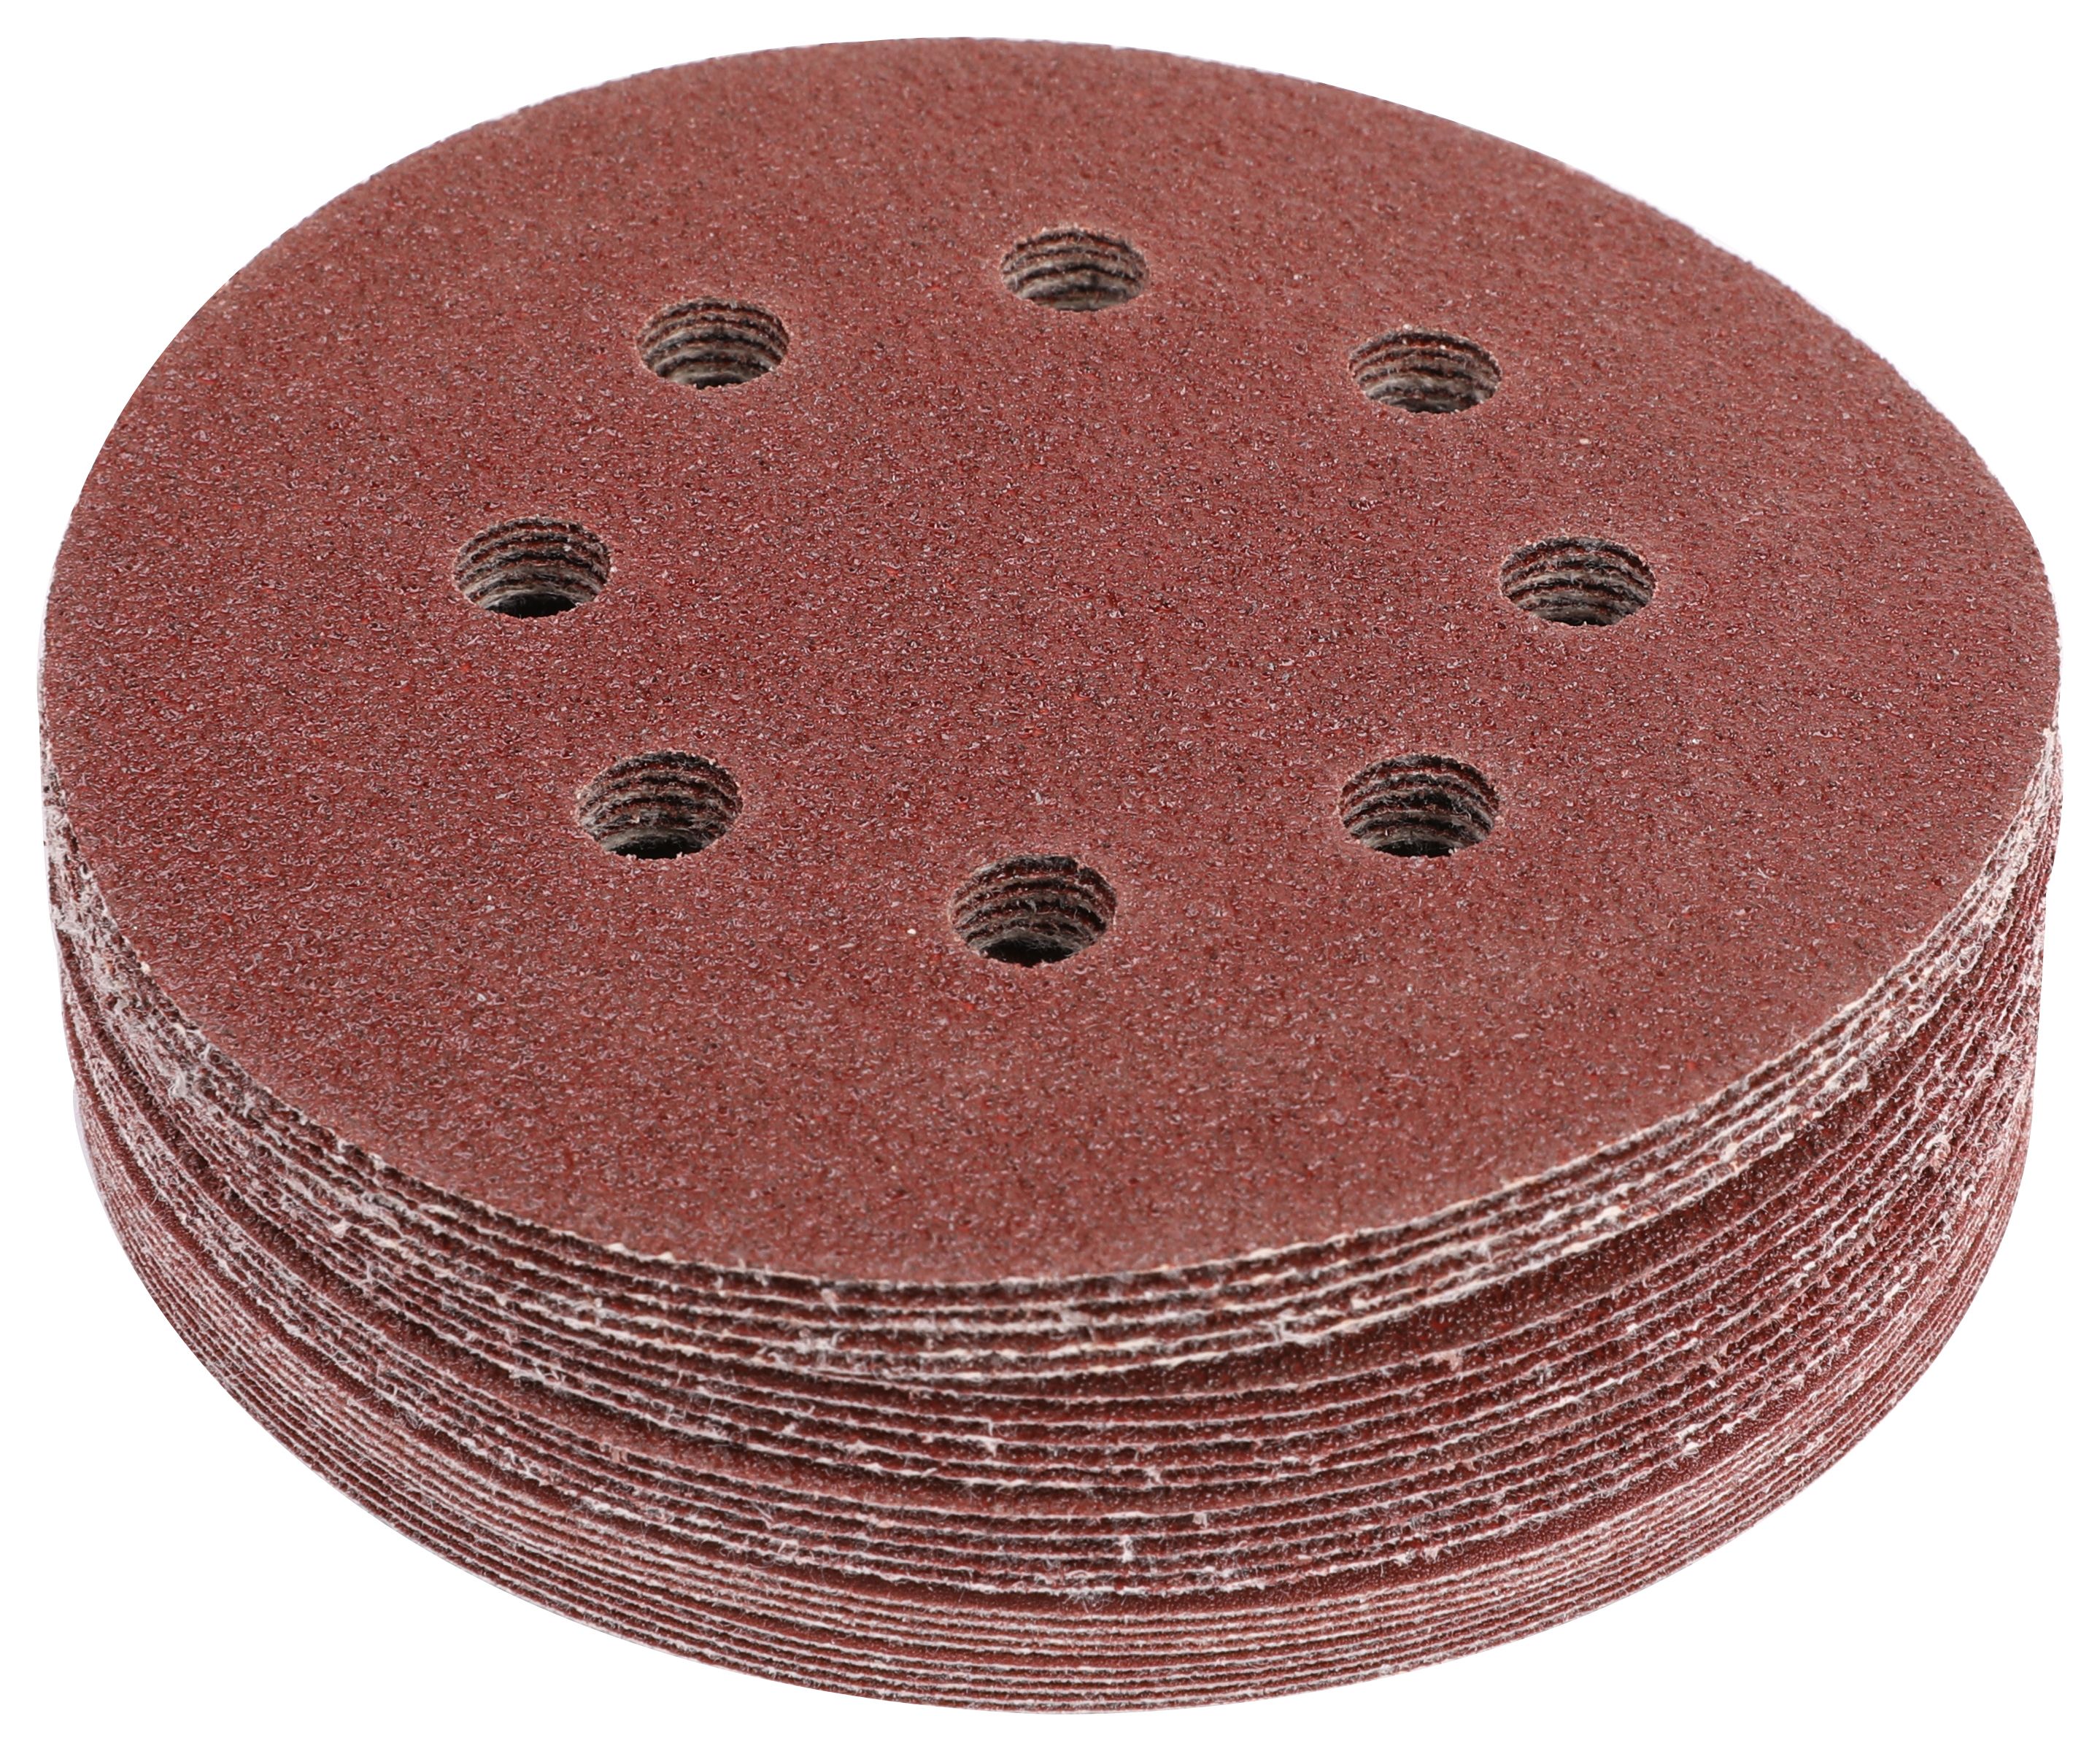 Image of Wickes Assorted Eccentric Sander Discs - Pack of 25